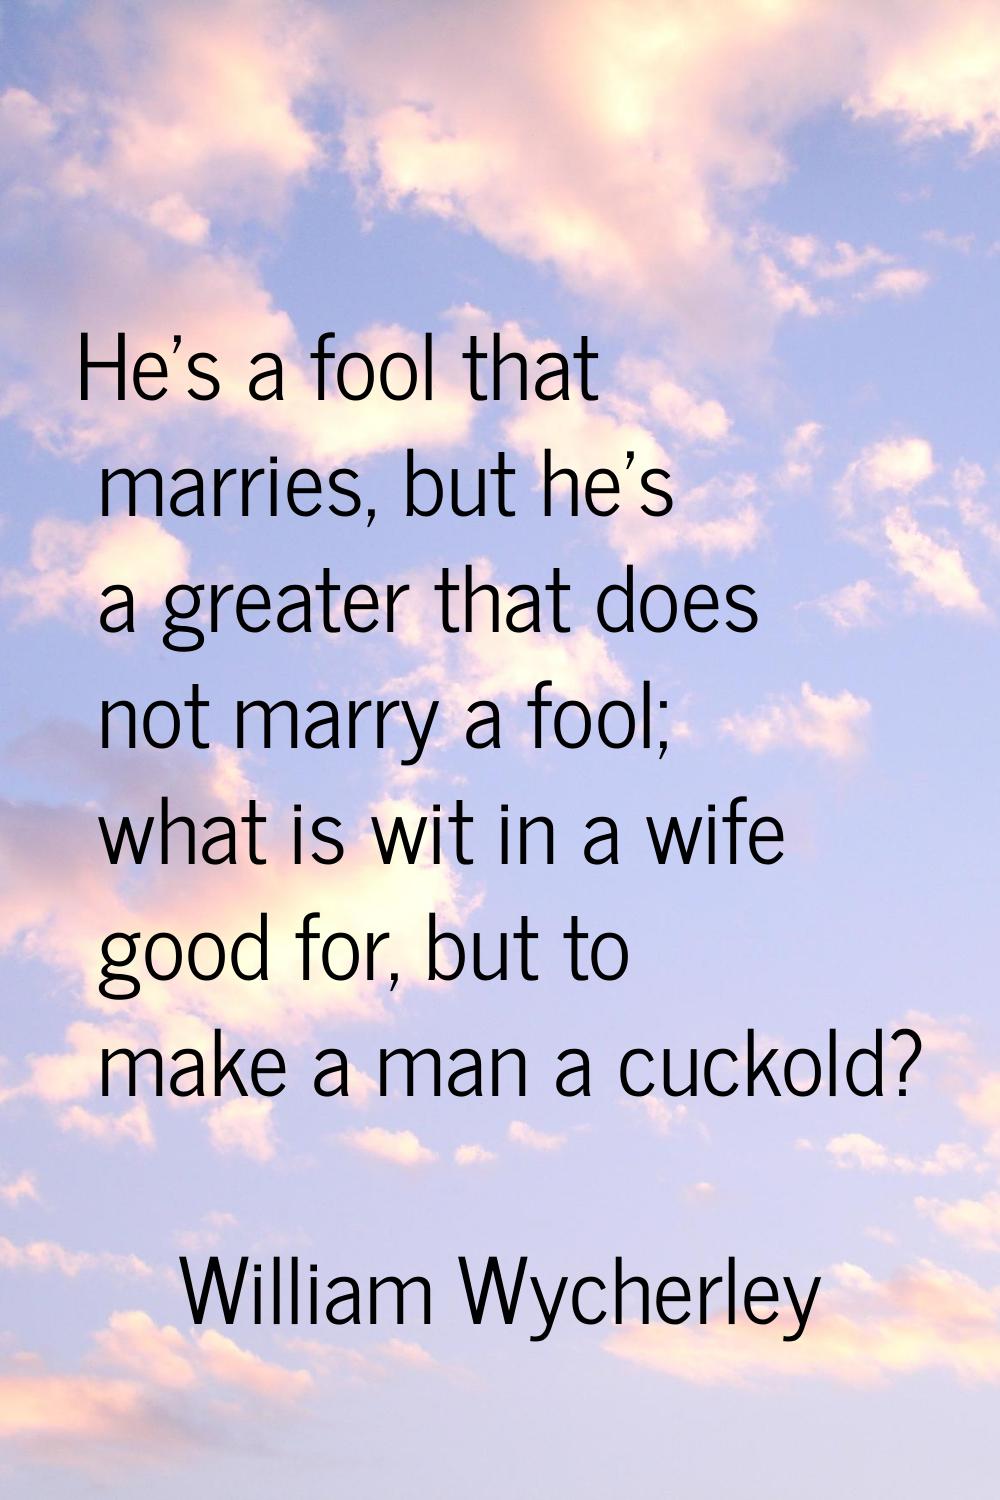 He's a fool that marries, but he's a greater that does not marry a fool; what is wit in a wife good